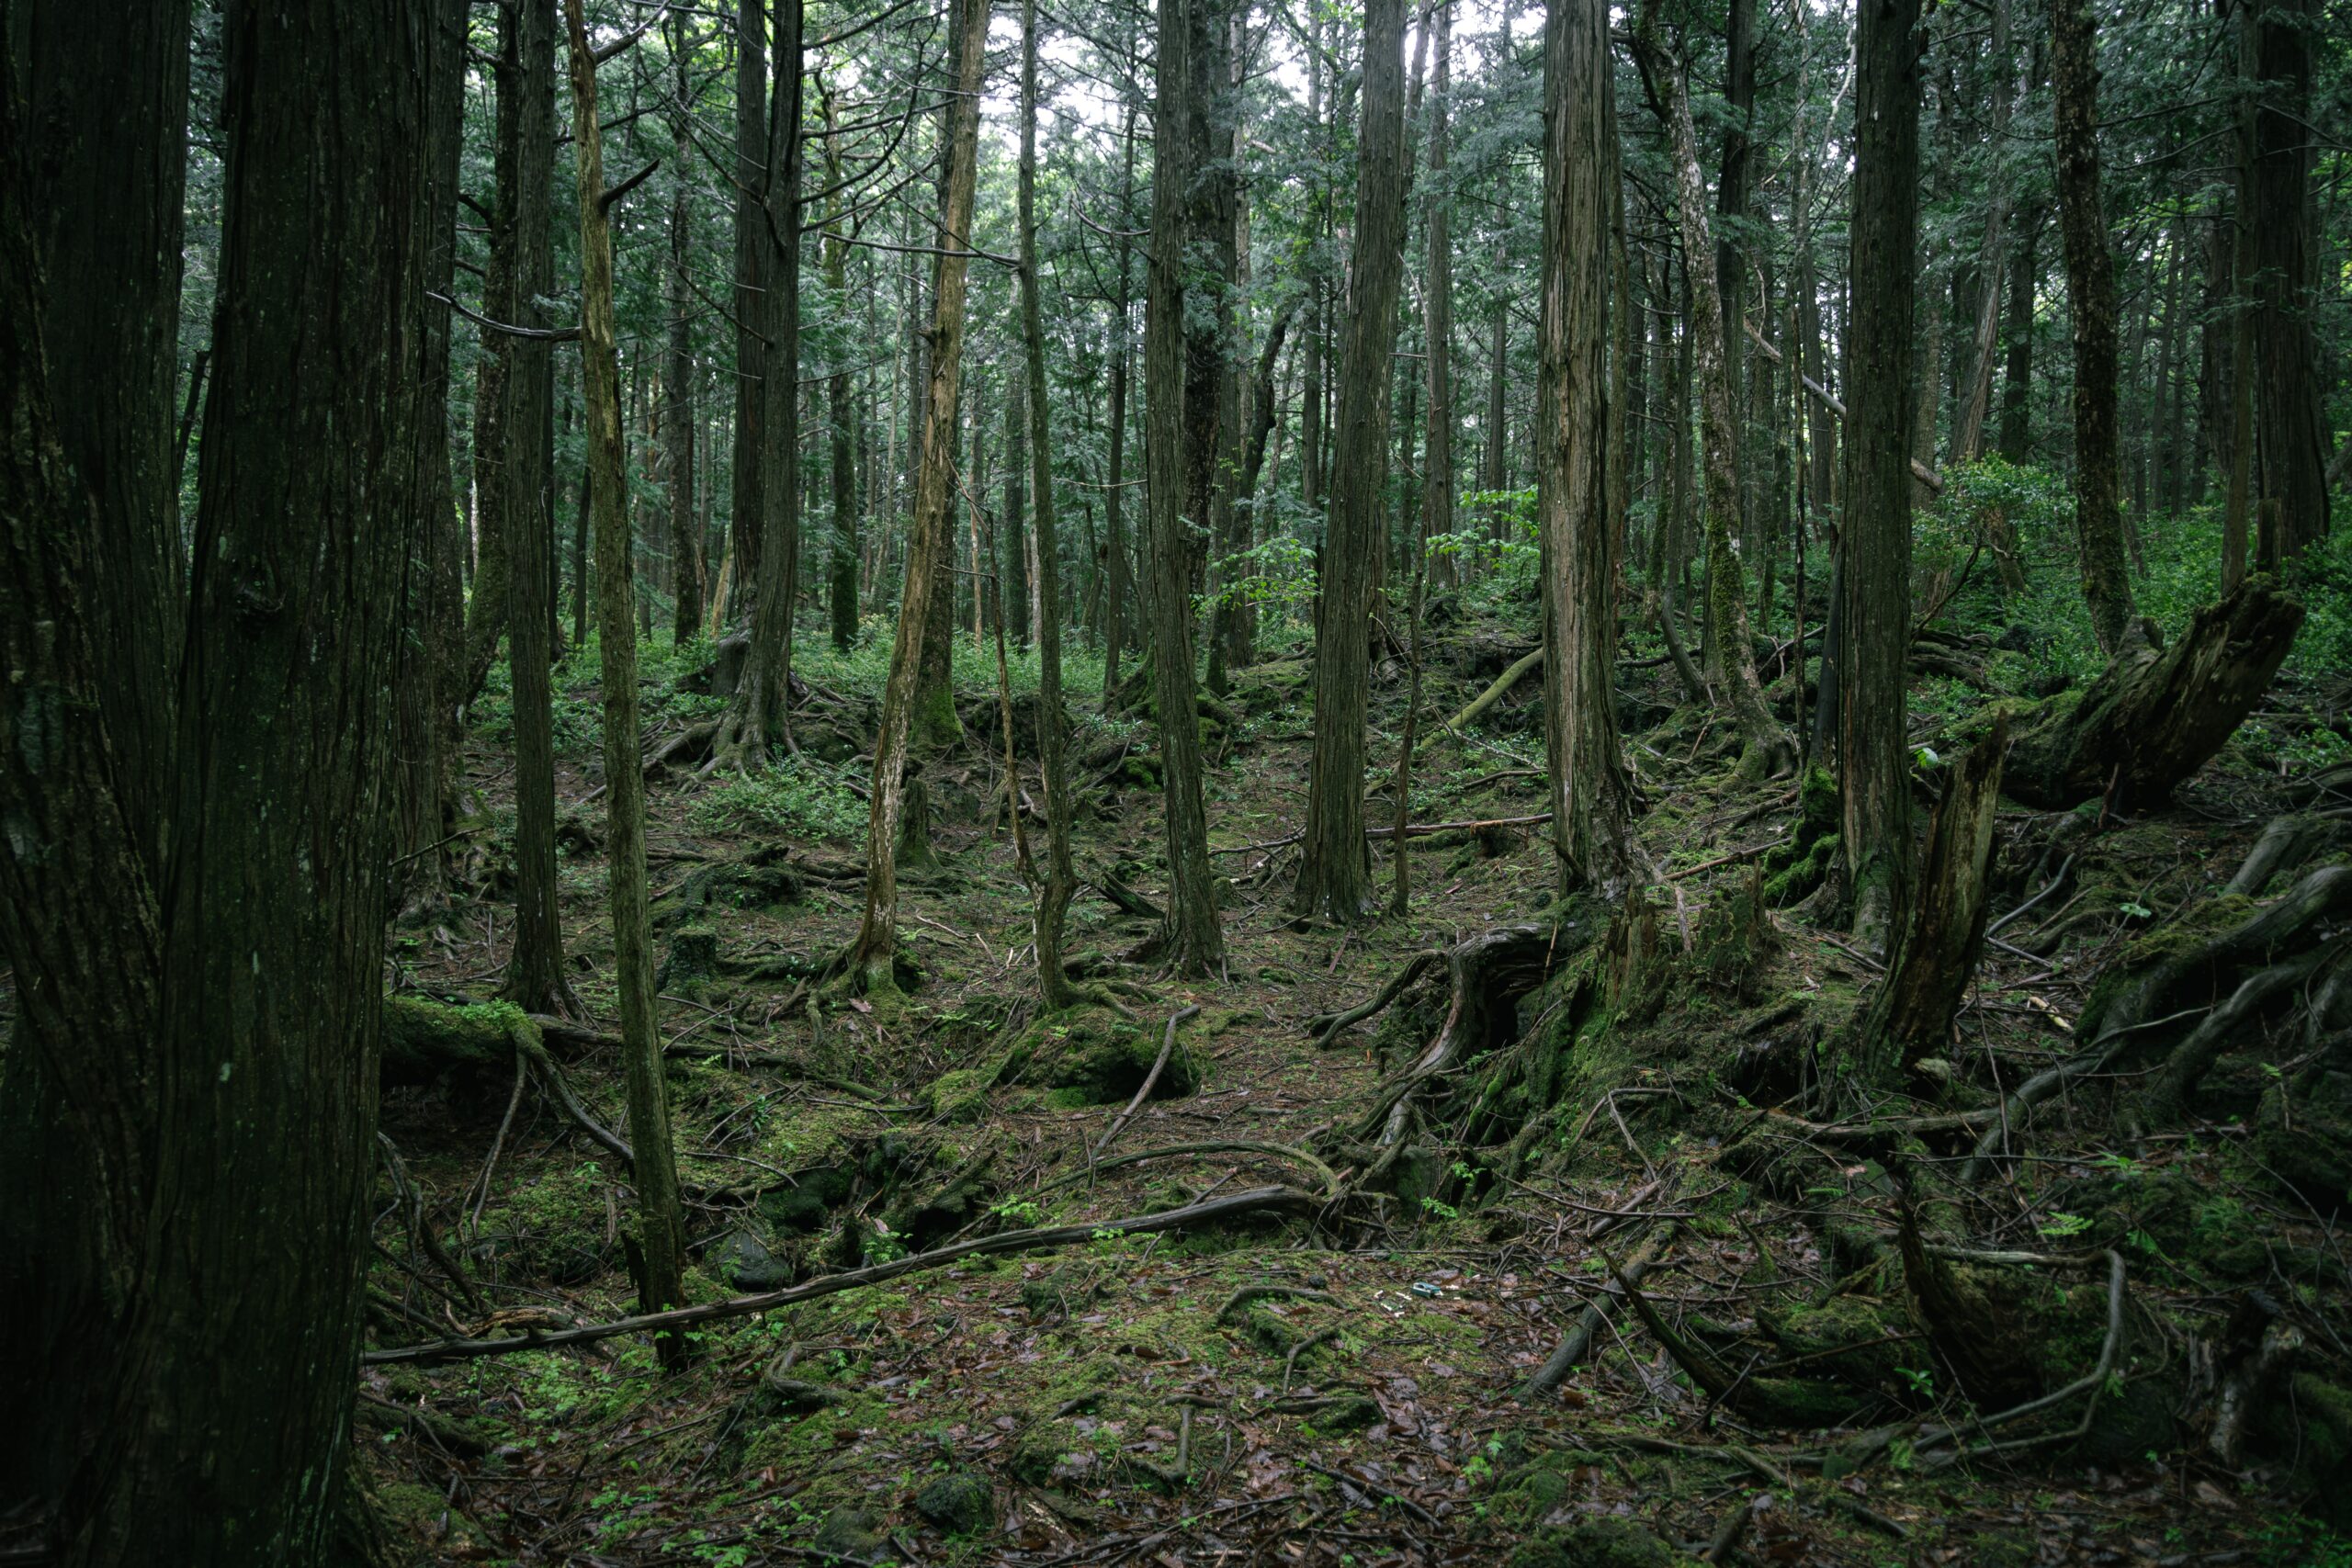 The Aokigahara Forest is mysterious to many people because it is not commonly frequented.
pictured: The empty Aokigahara Forest with a green mossy floor in the day time 